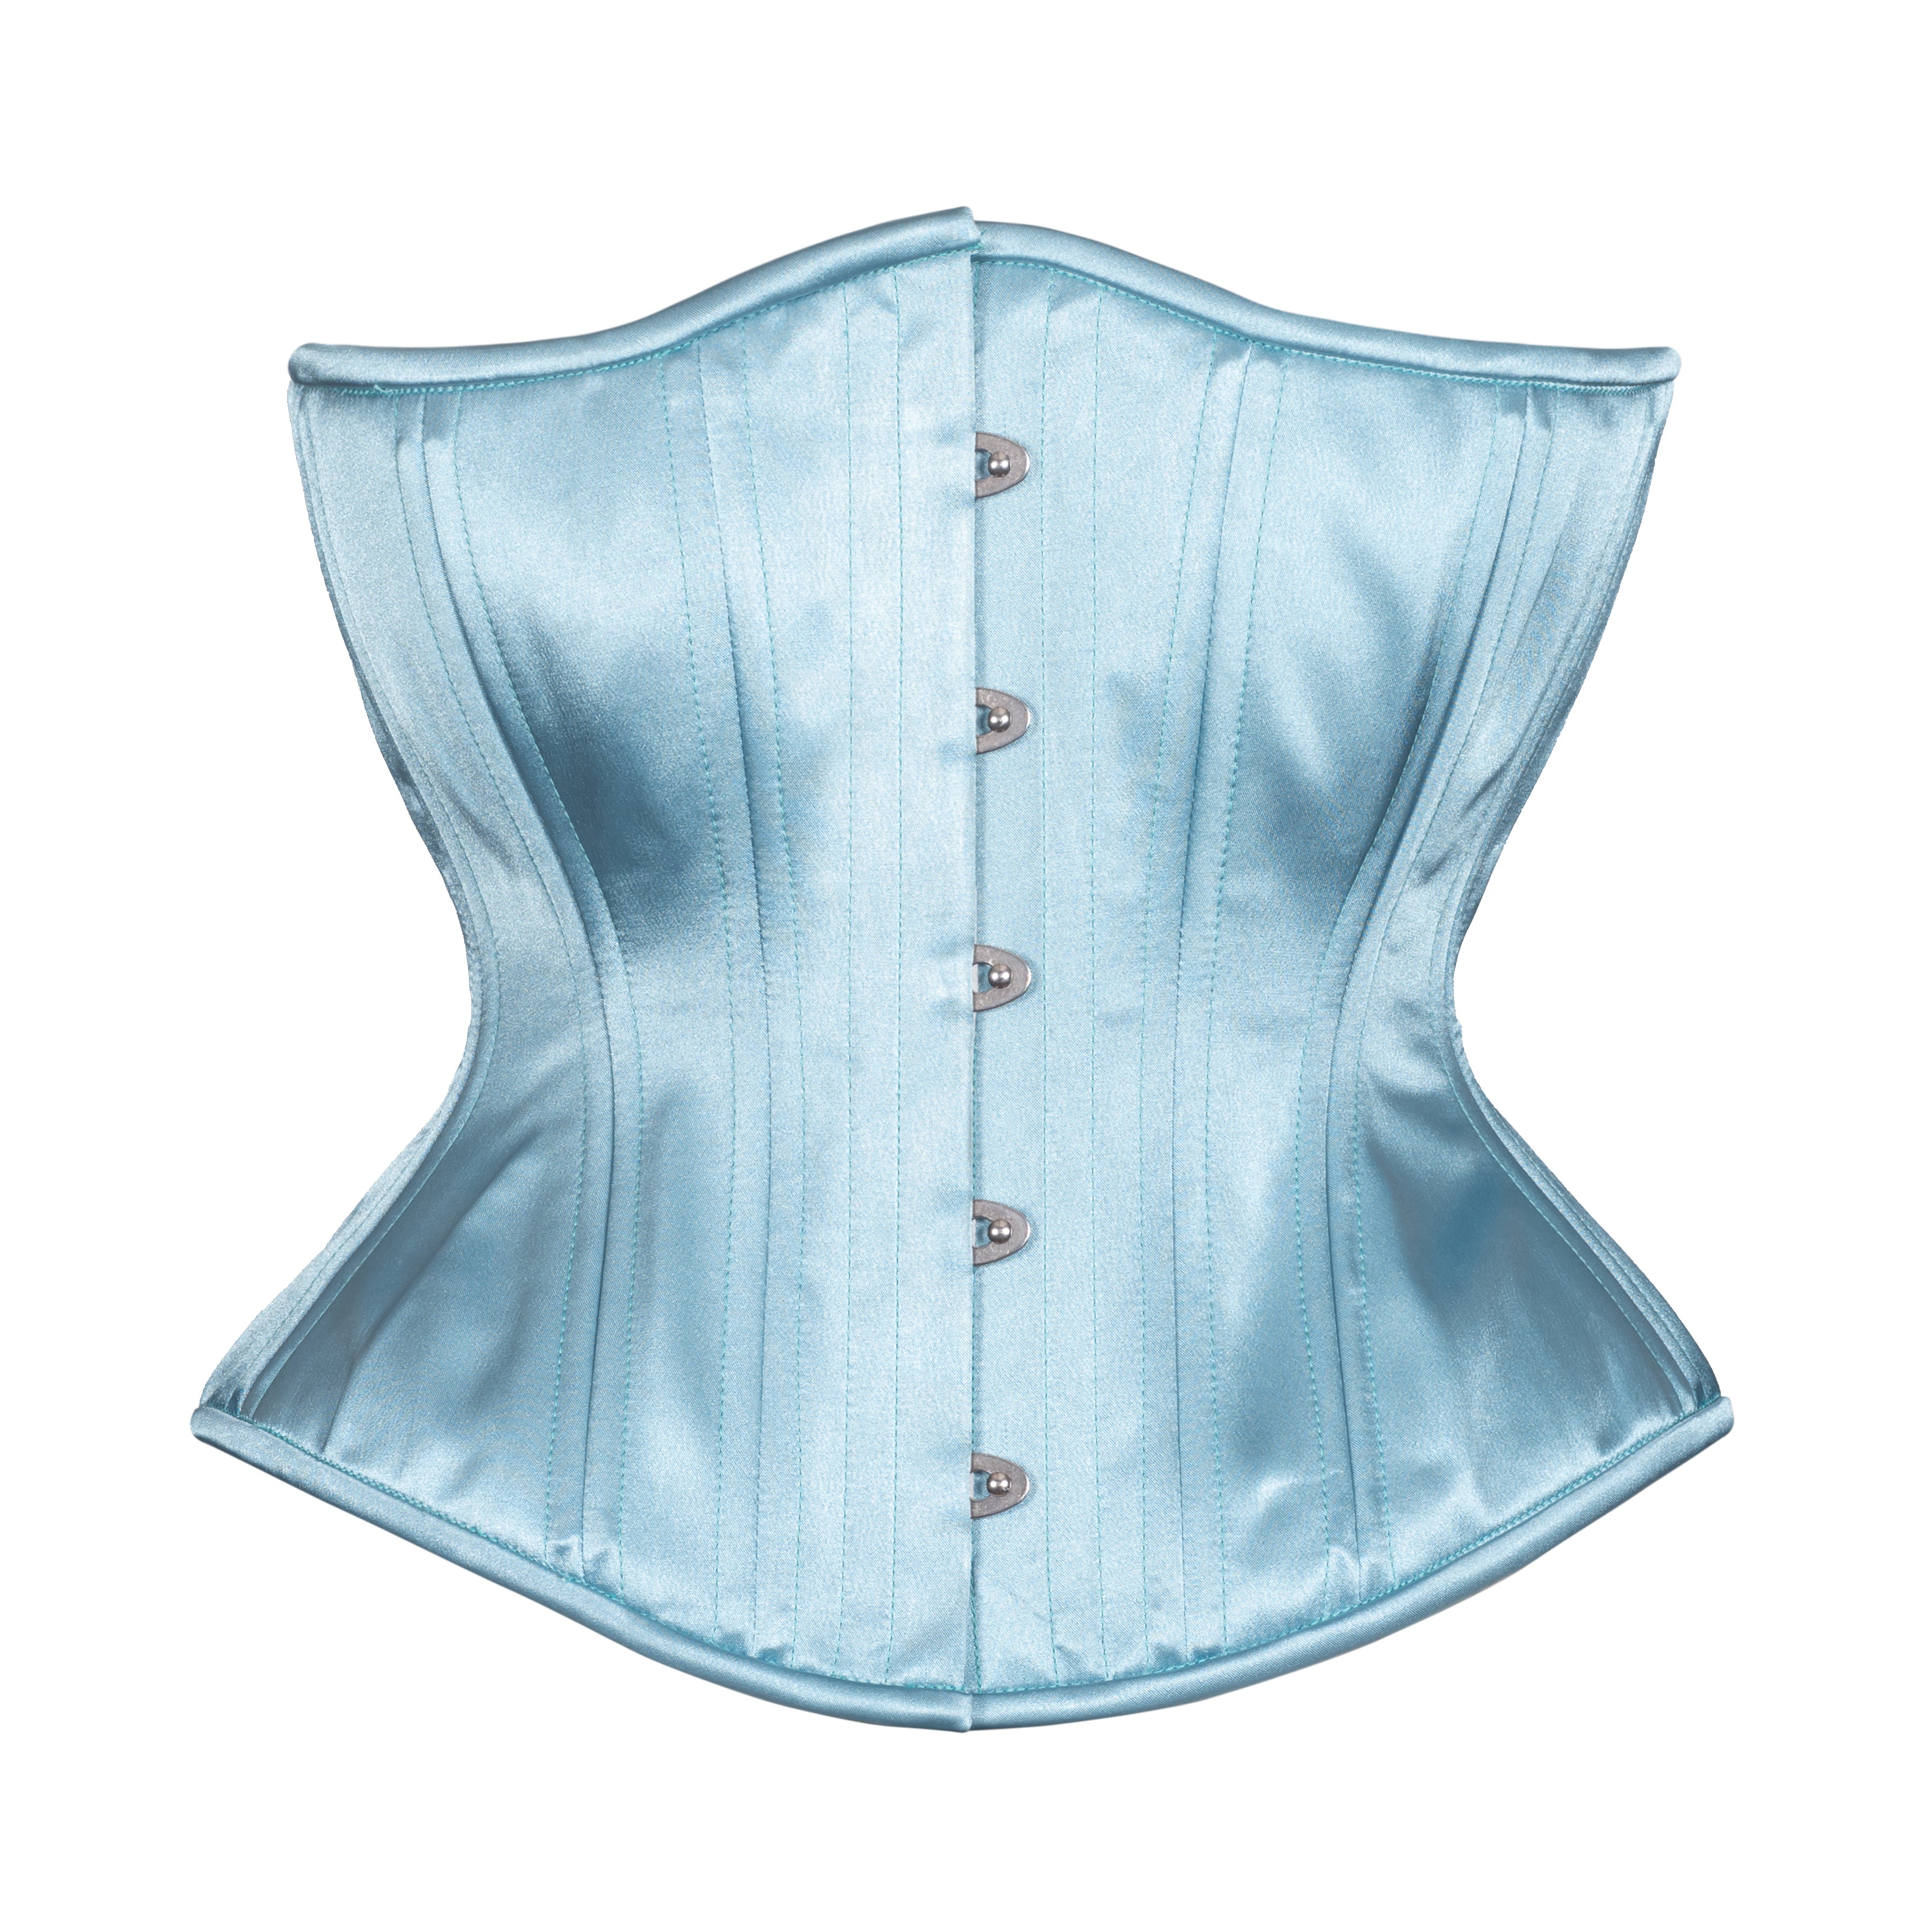 Limited Edition Spring Print Satin Hourglass Curve Corset with Hip